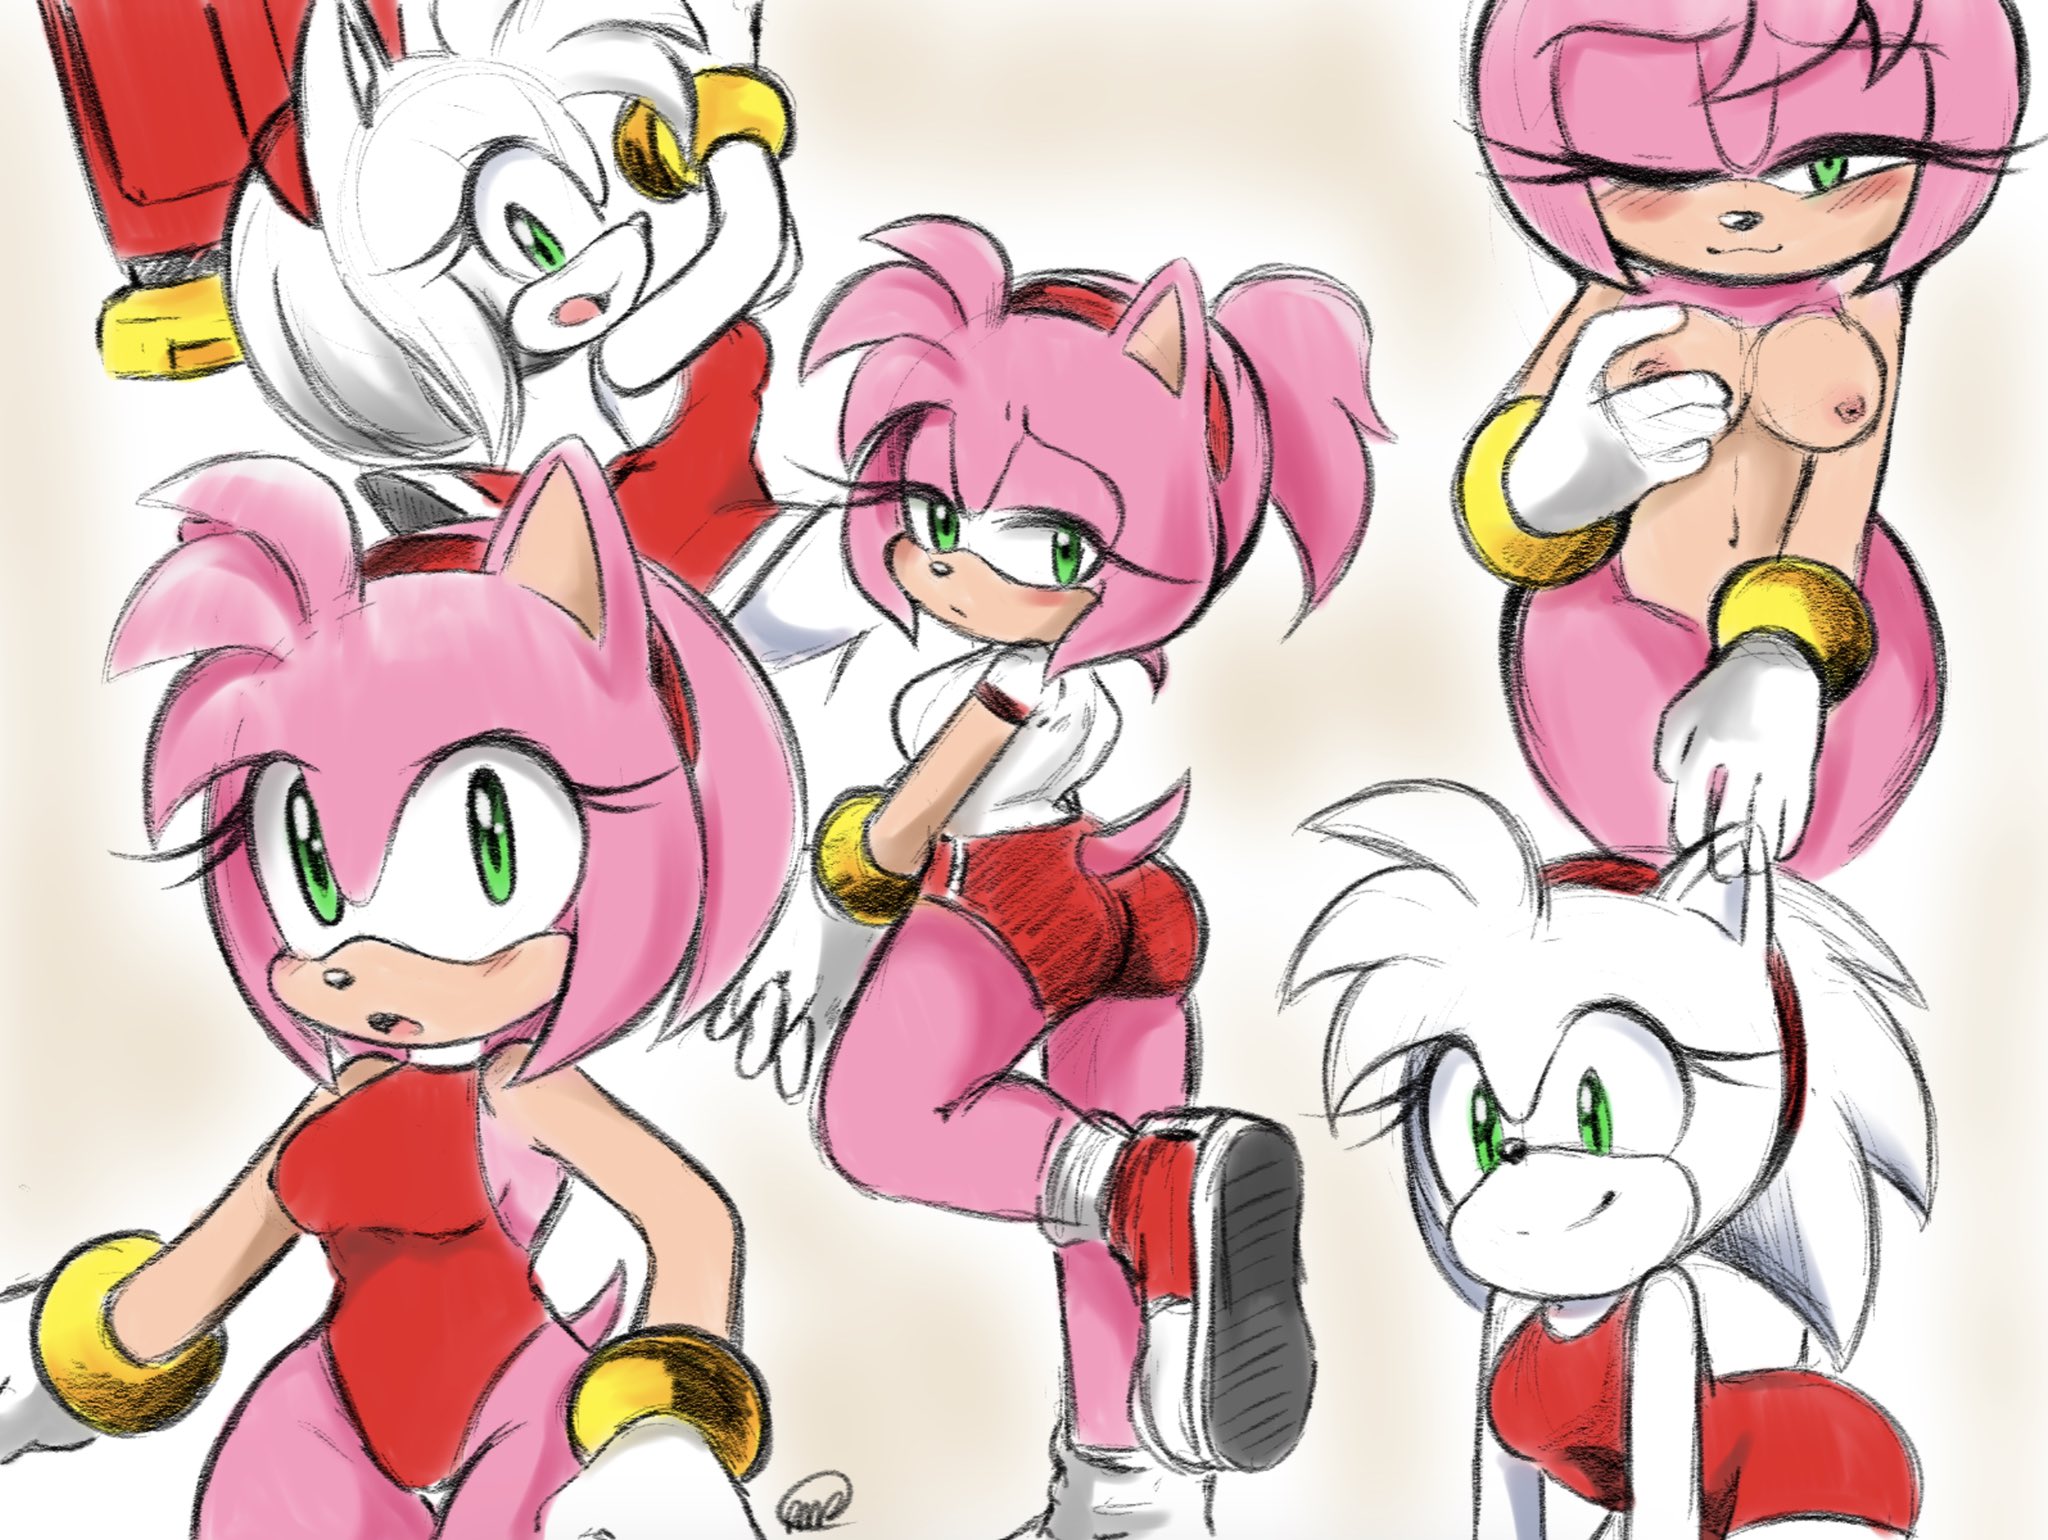 18. Felt like drawing Amy so here’s some Amy doodles. 